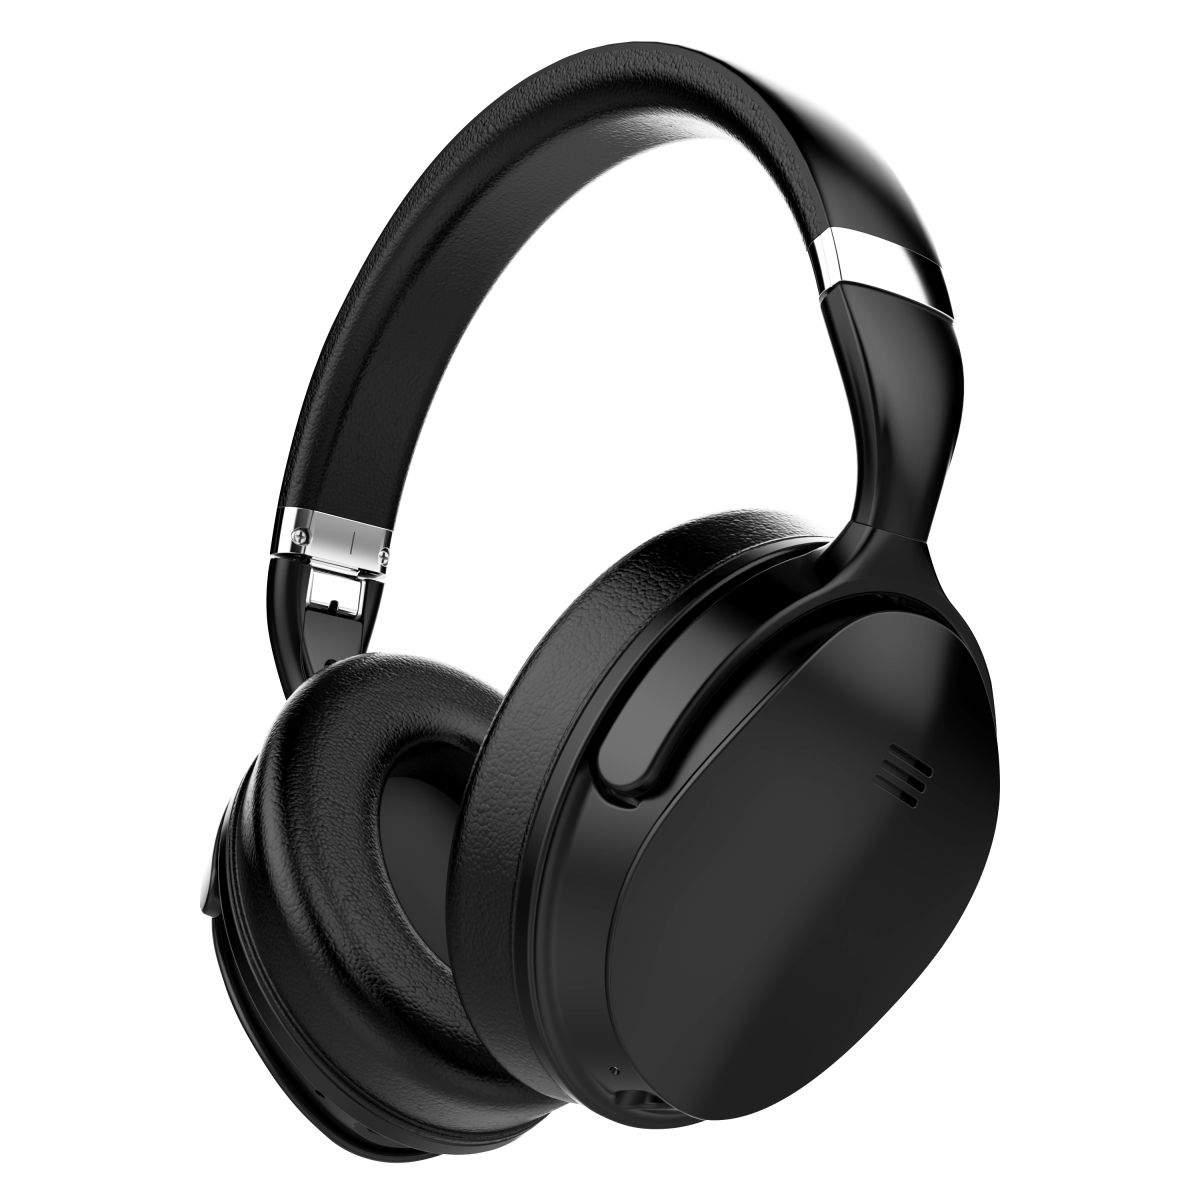 VolkanoX Bluetooth Noise Cancelling Headphones - Silenco Series - Black |  Buy Online in South Africa 